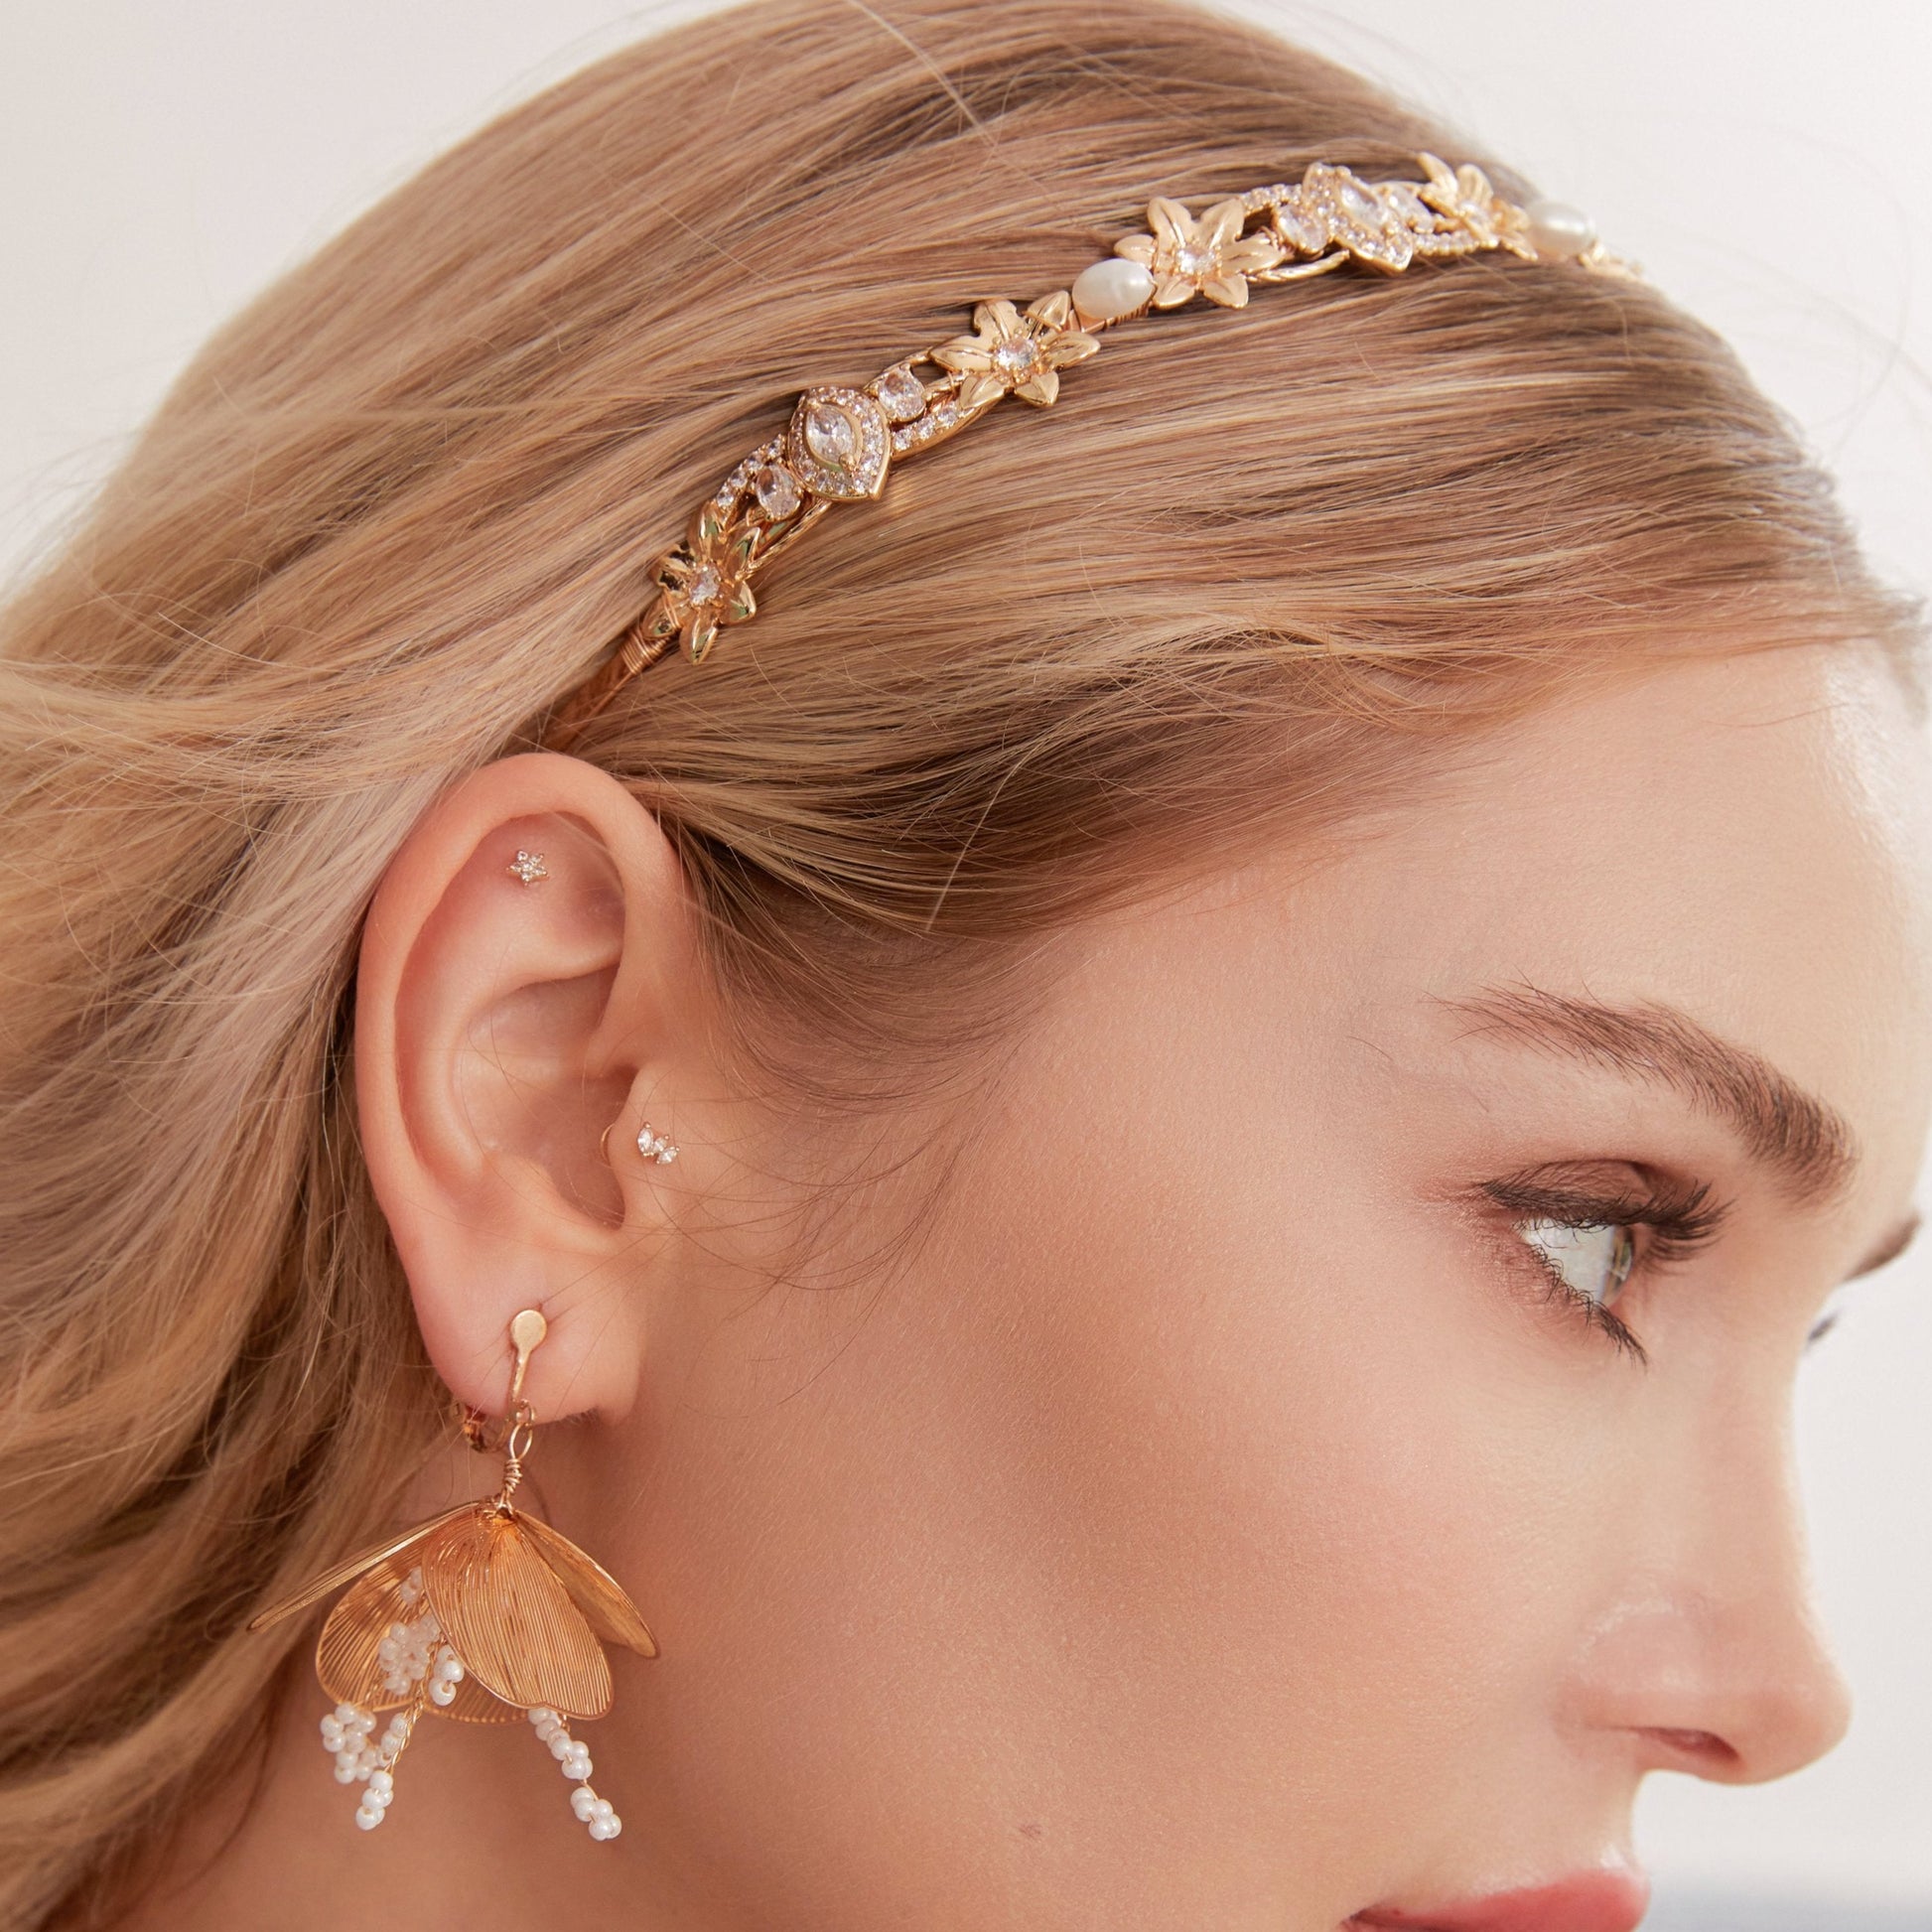 This slimline, modern gold headband is made from the most beautiful freshwater pearls and shimmering rhinestones. The minimalist floral design and timeless luxury of pearls and stones are always in style.